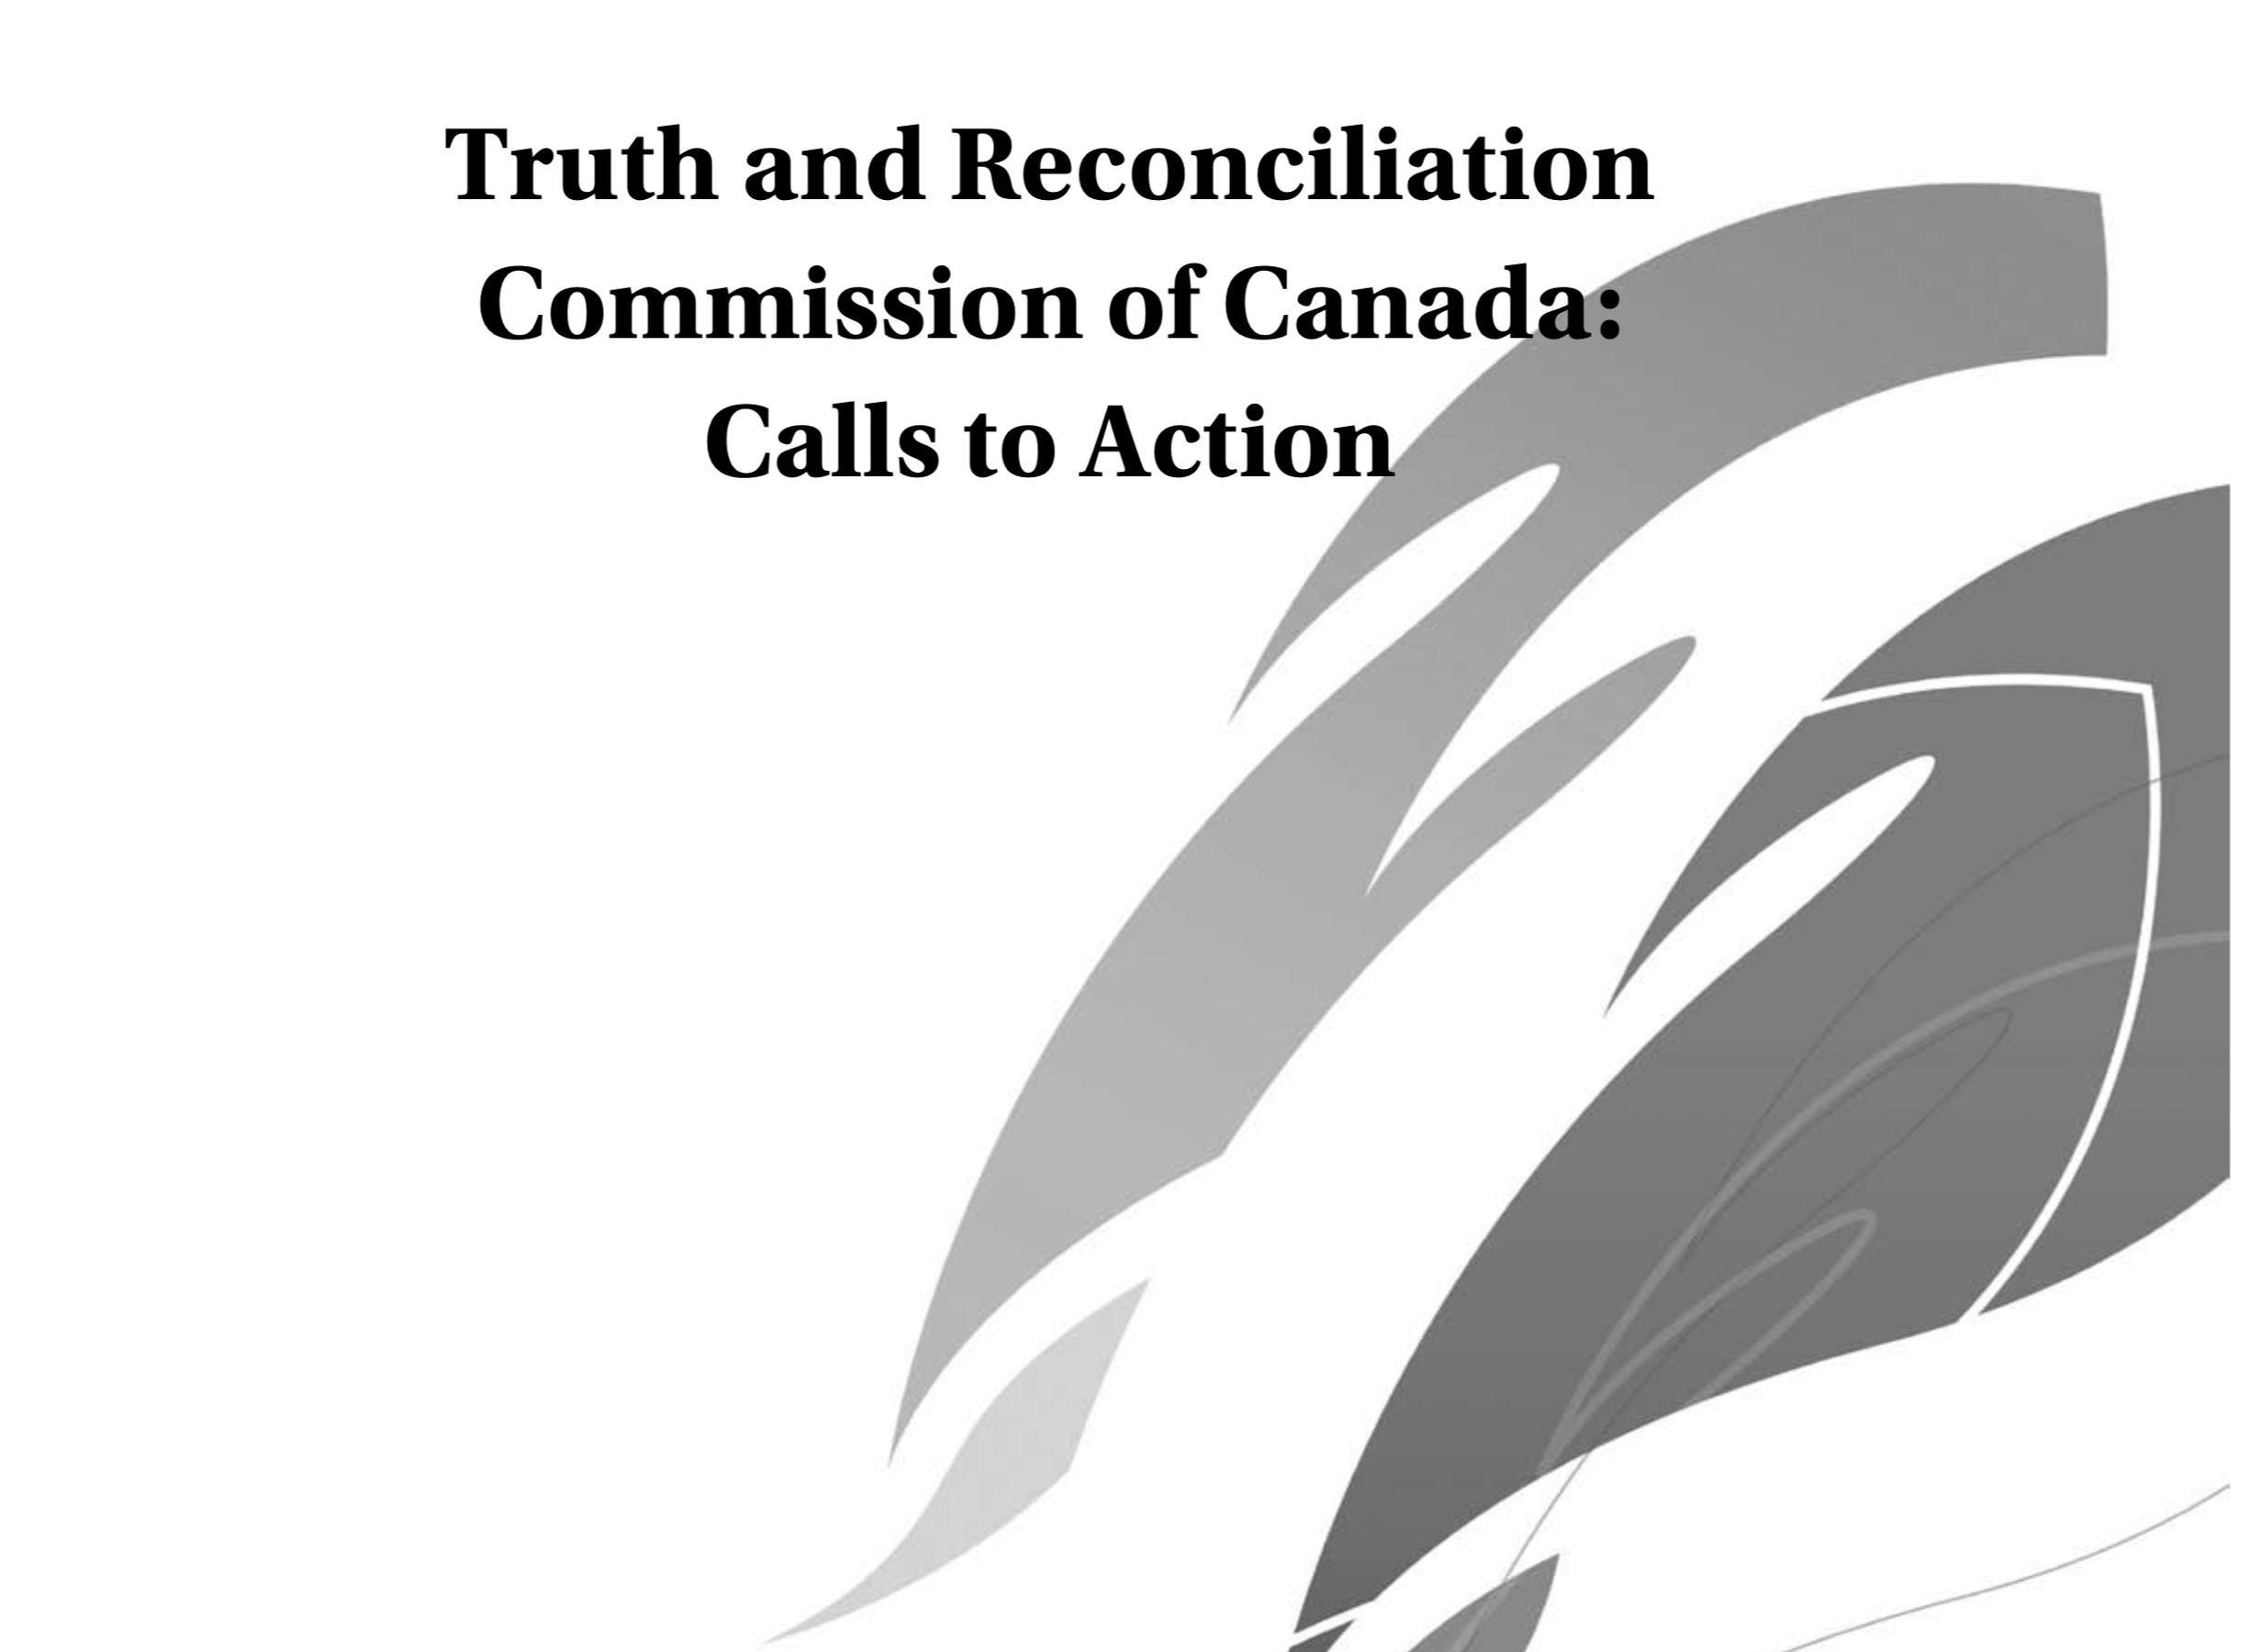 cover from the "calls to Action" document